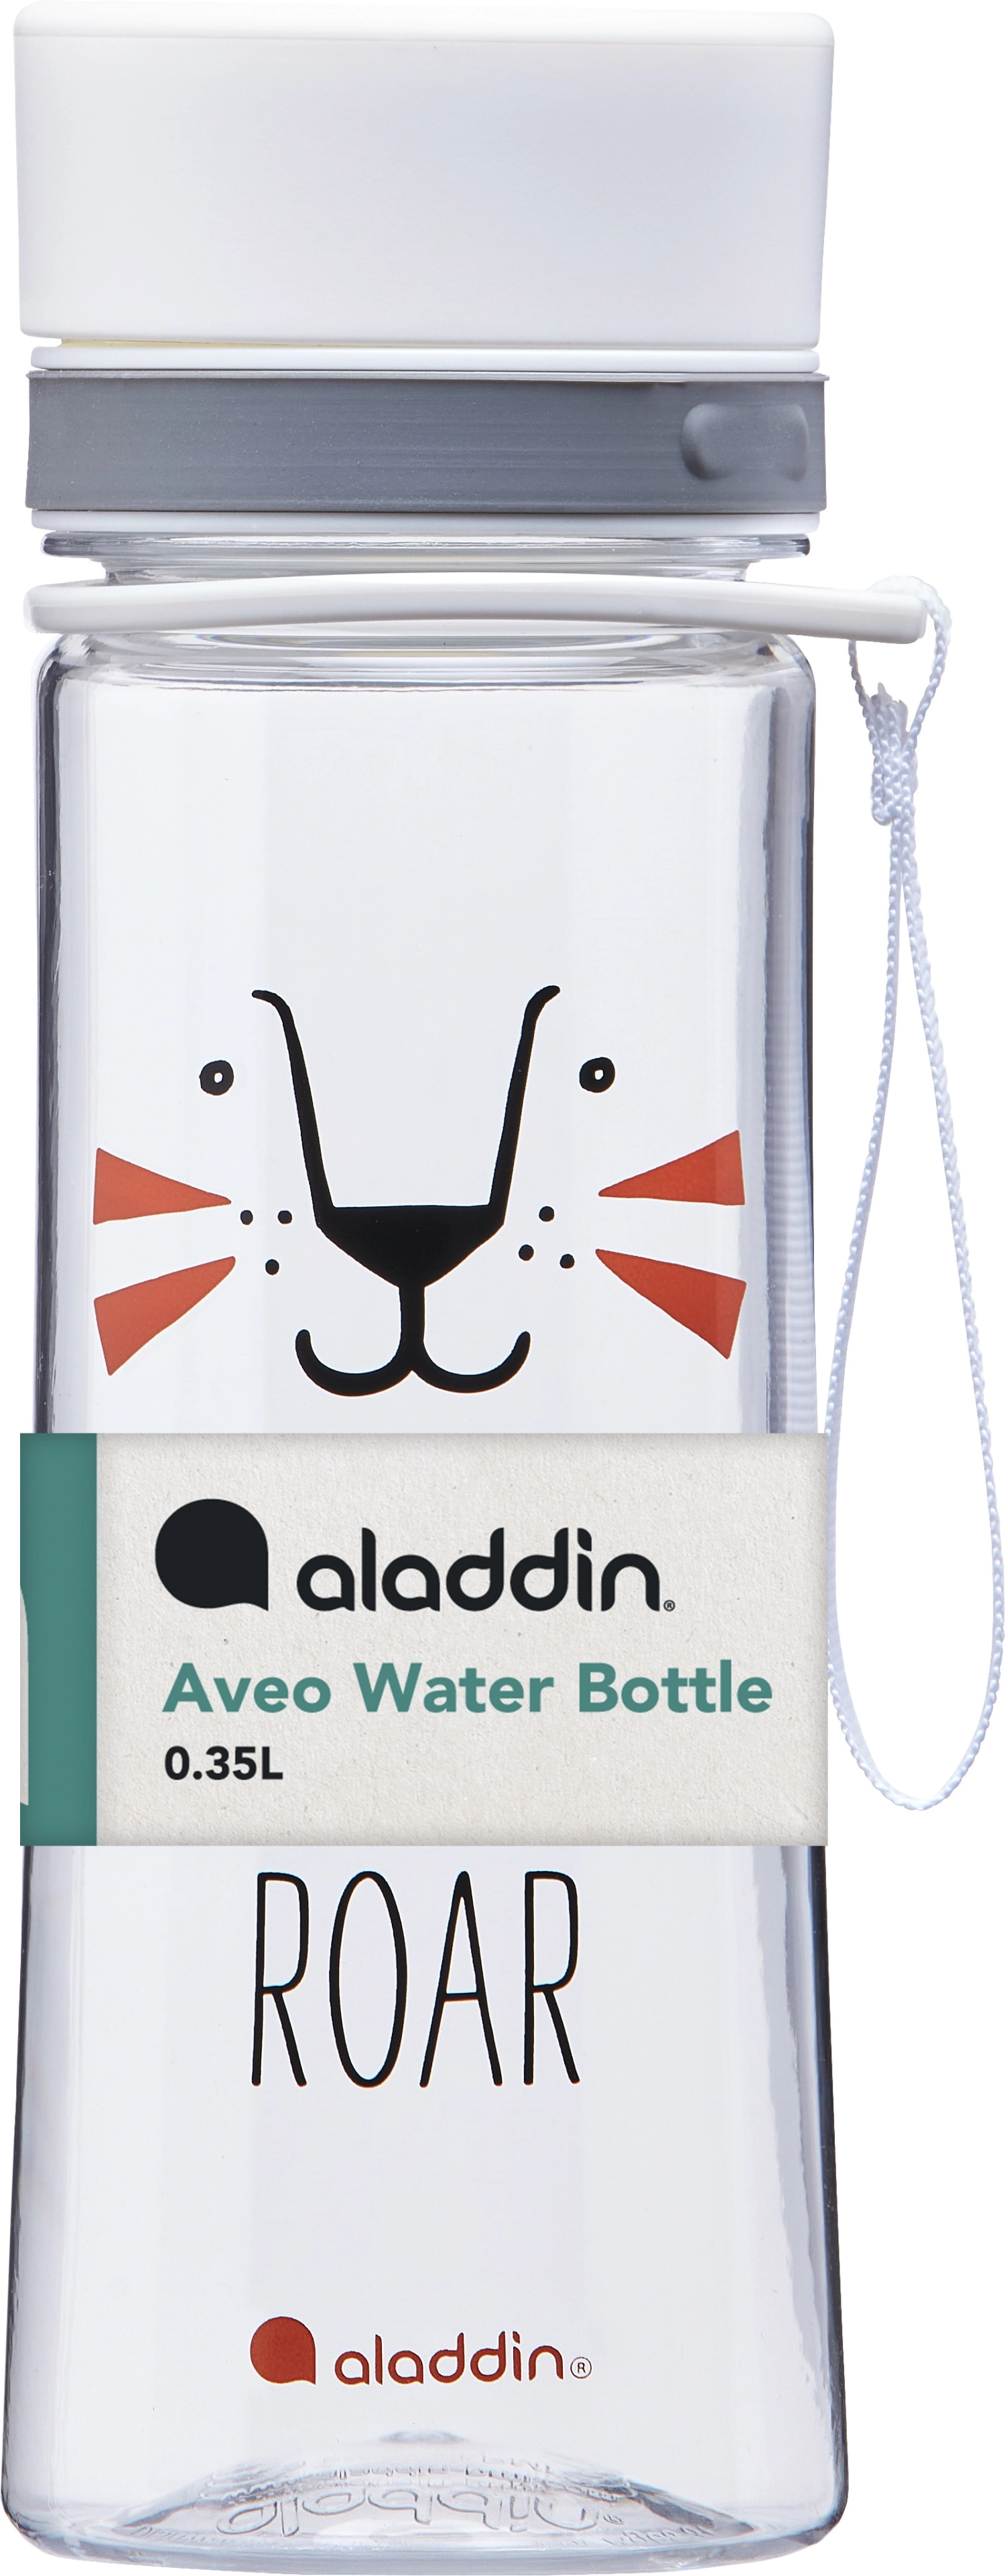 Aladdin my first aveo lion water bottle for kids 0.35l white